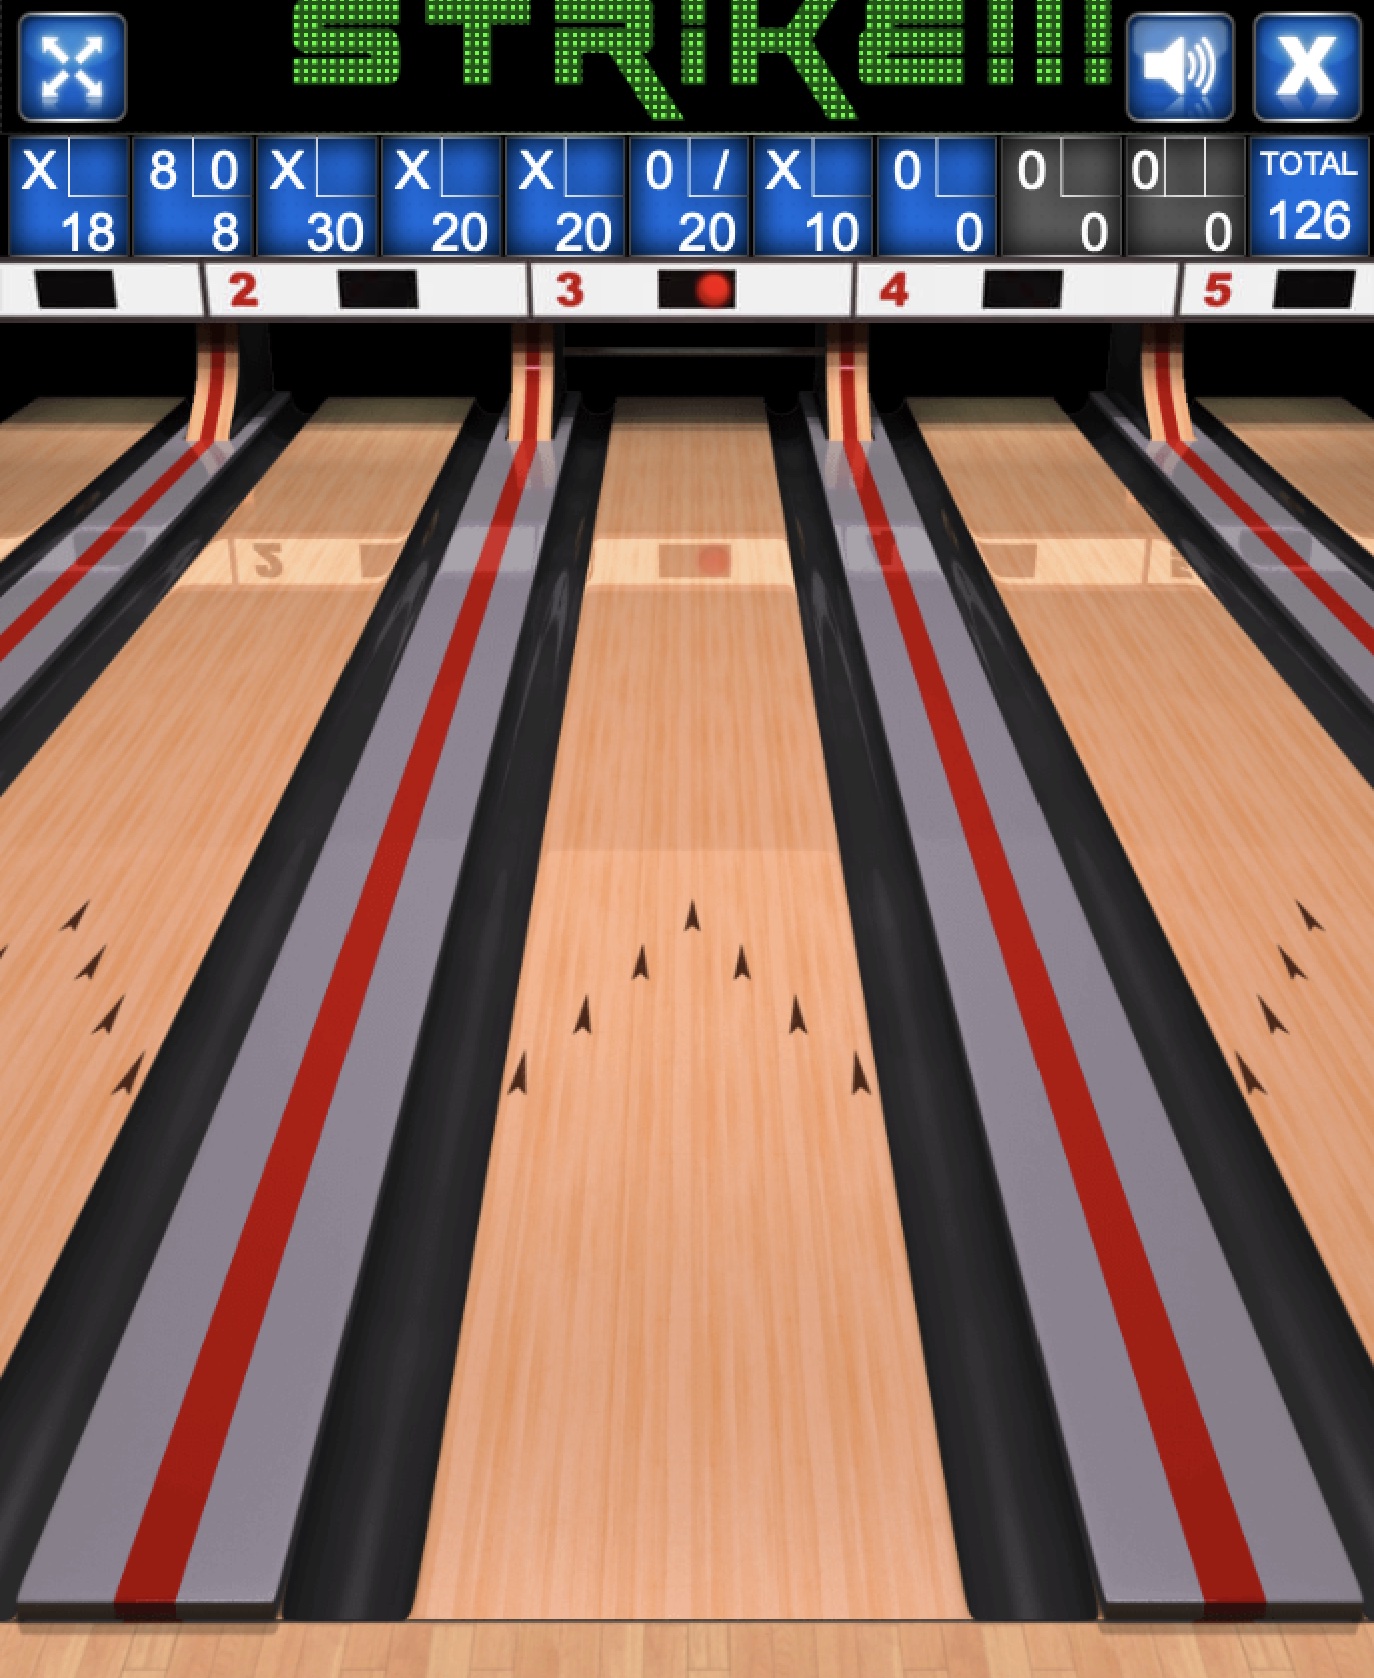 Play Free Browser Game Bowling on GAWOONI.GAMES!